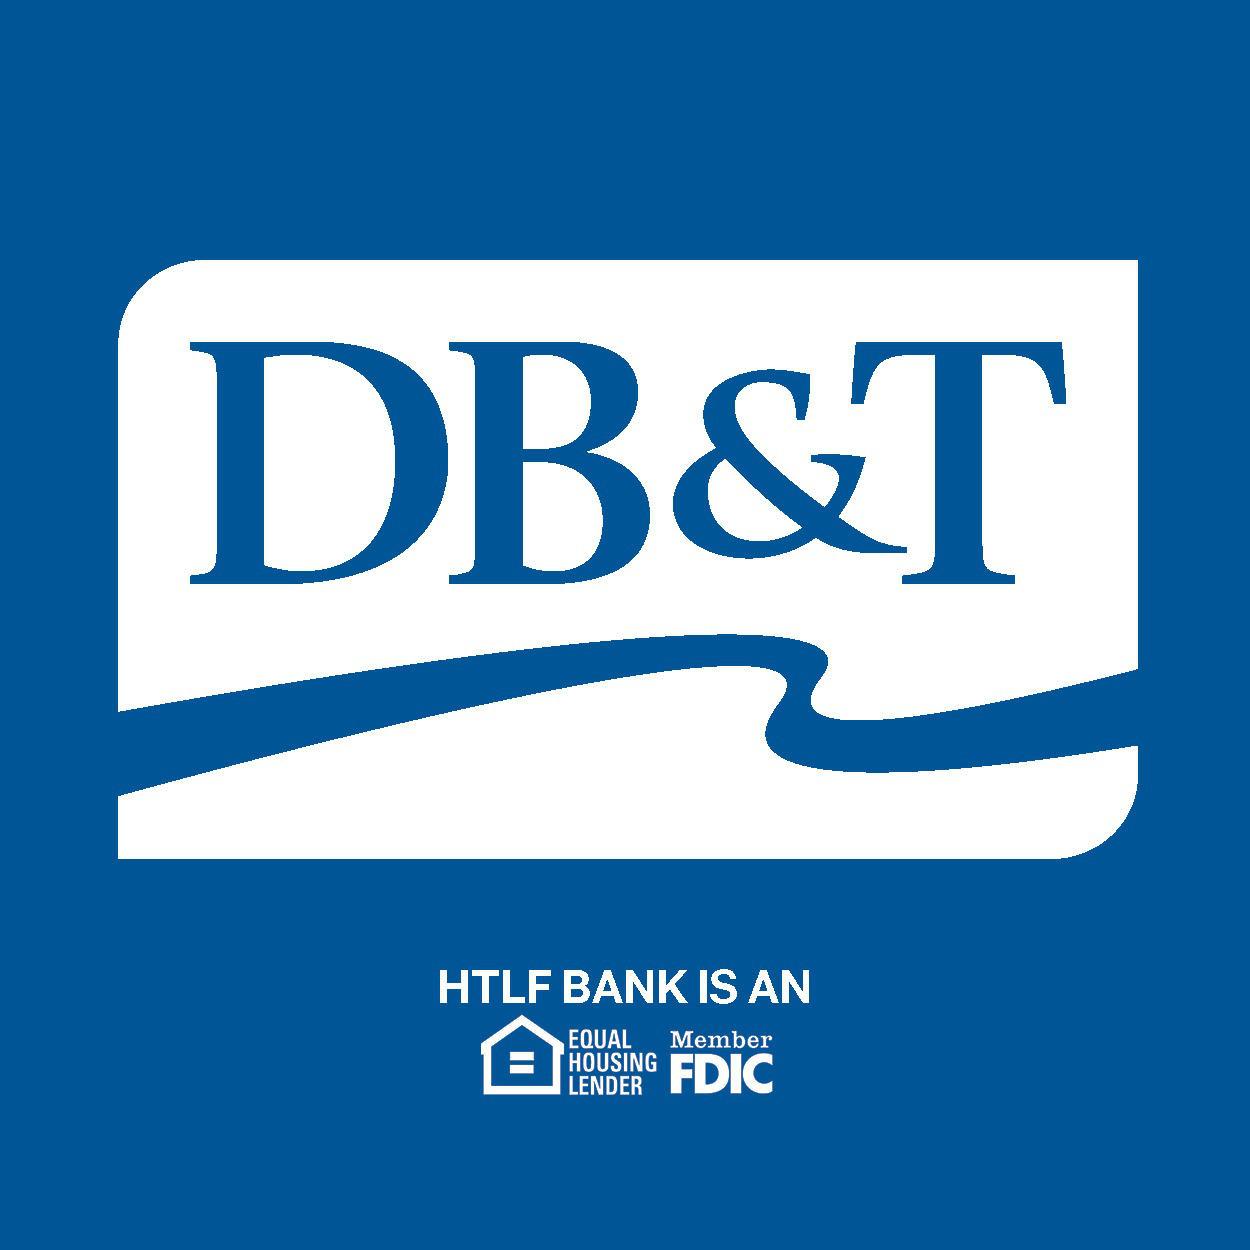 Dubuque Bank & Trust, a division of HTLF Bank - Dubuque, IA 52002 - (563)589-2150 | ShowMeLocal.com